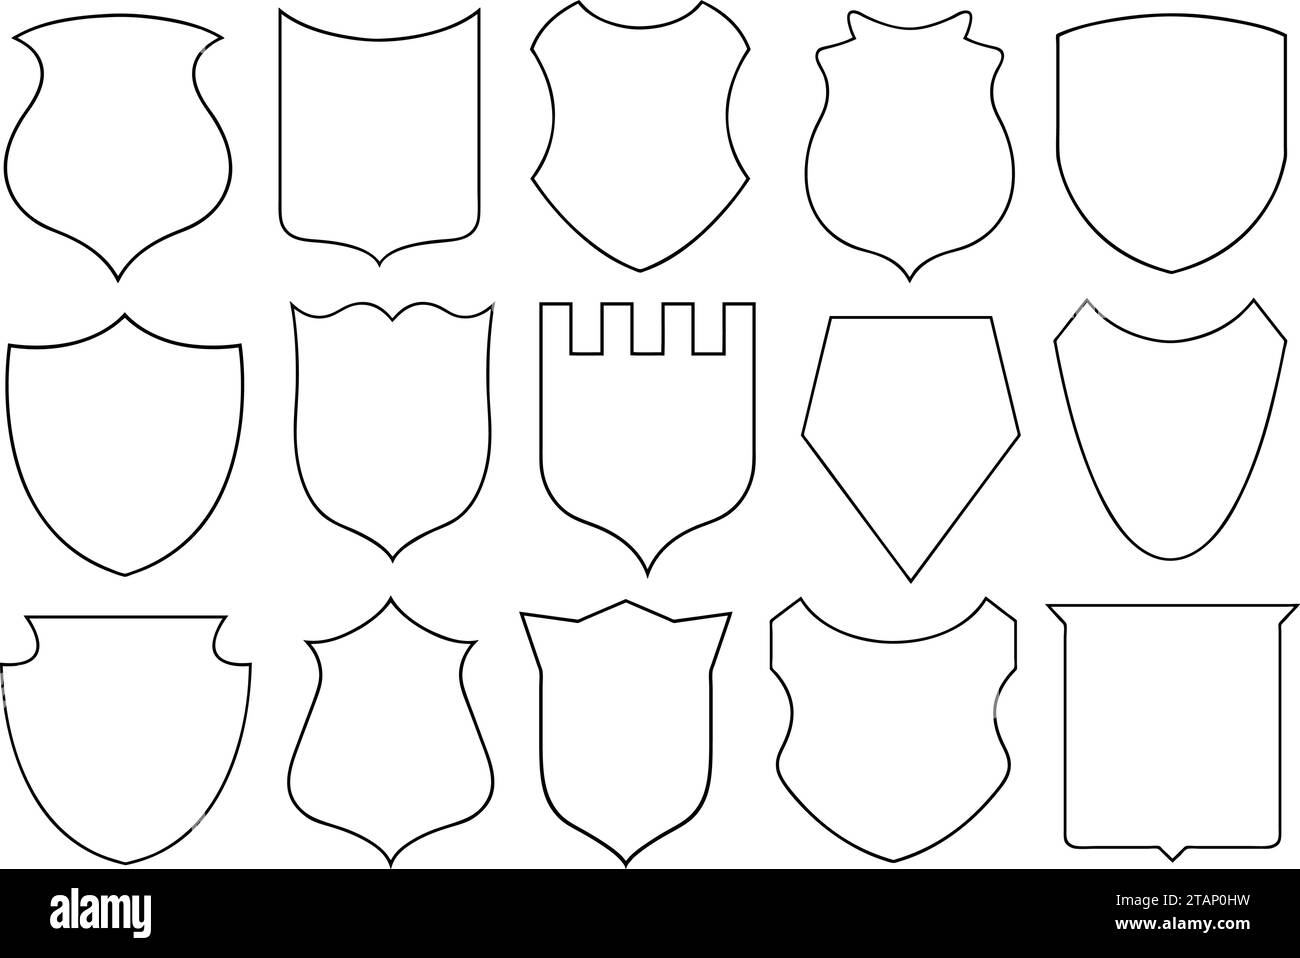 Illustration of different shields isolated on white background Stock Vector